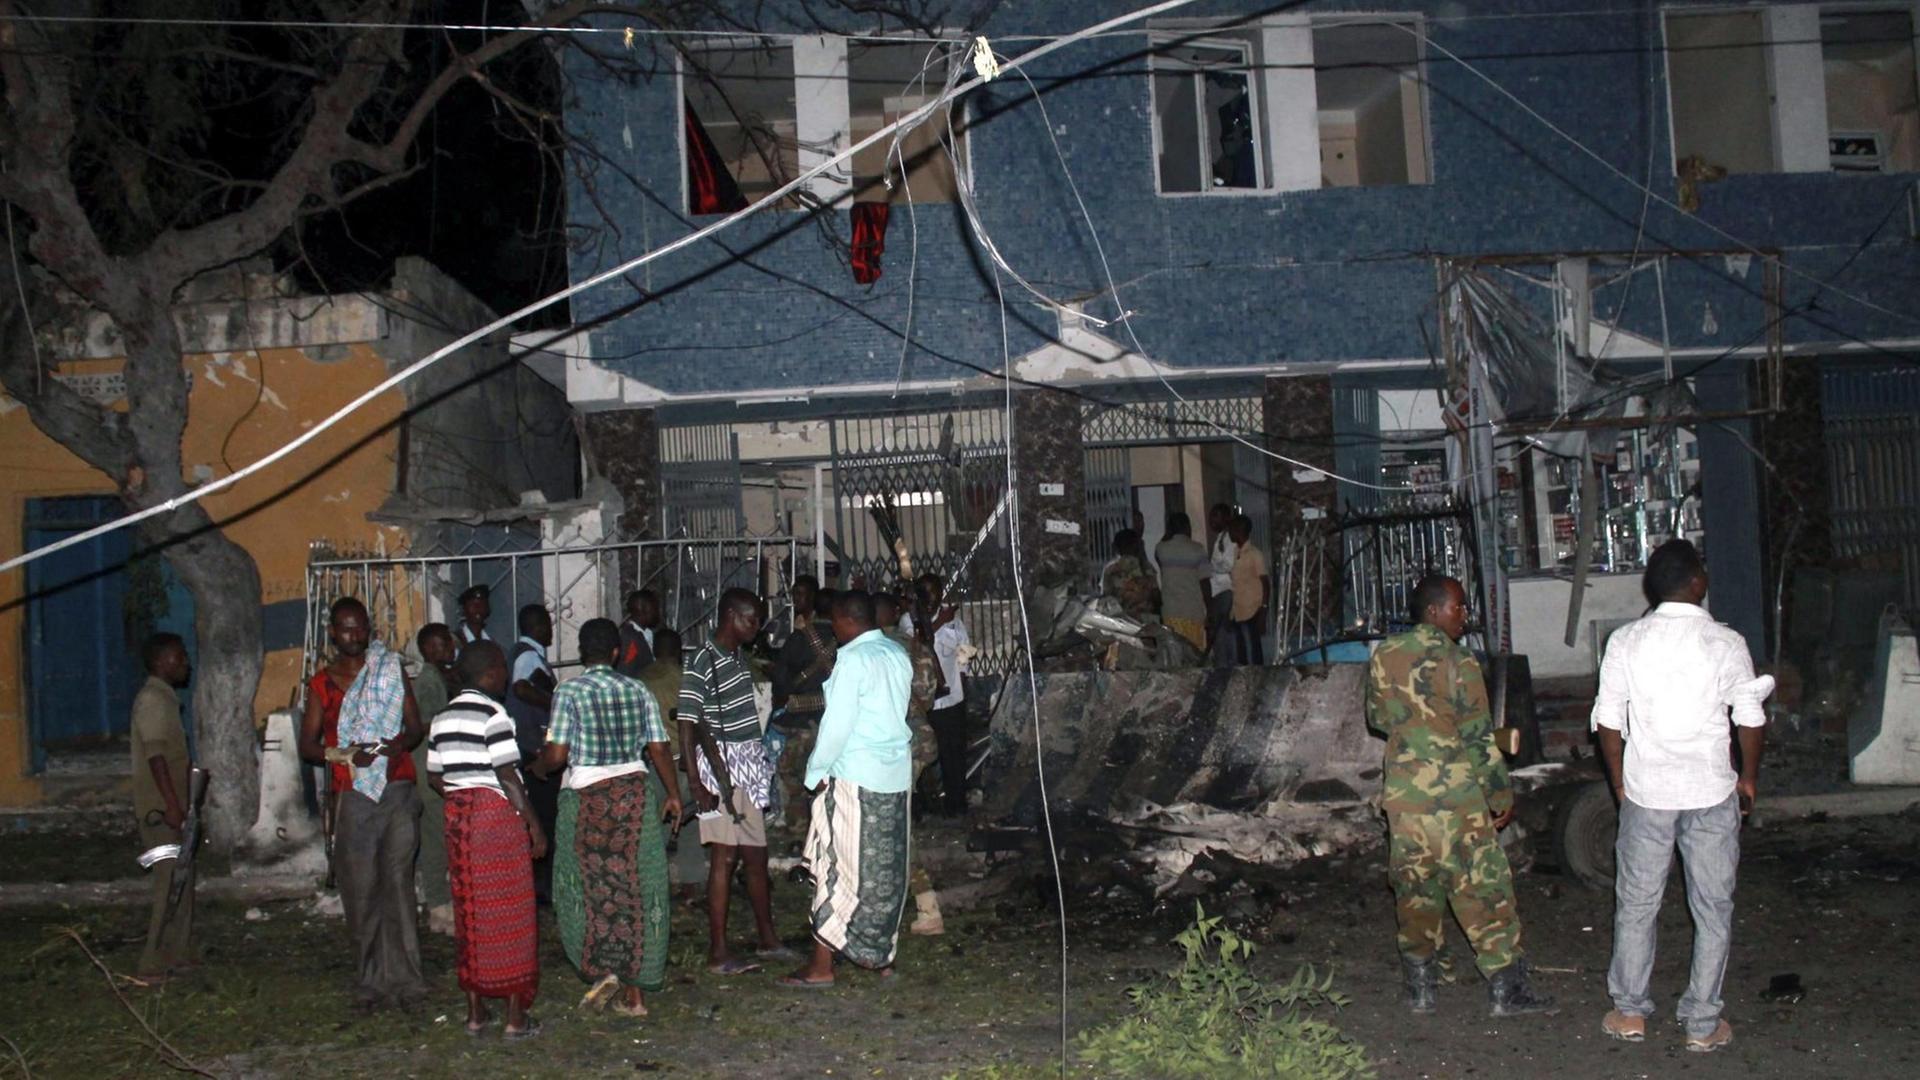 Residents and security officers gather at the scene of a car bomb explosion in front of a hotel that was attacked in Mogadishu, Somalia, 10 July 2015. Reports say the heavy gunfire followed explosions at Wehliya hotel in Mogadishu, killing at least 4 people. Somalia's Islamist militant group al-Shabab has claimed responsibility for the latest attack. EPA/SAID YUSUF WARSAME